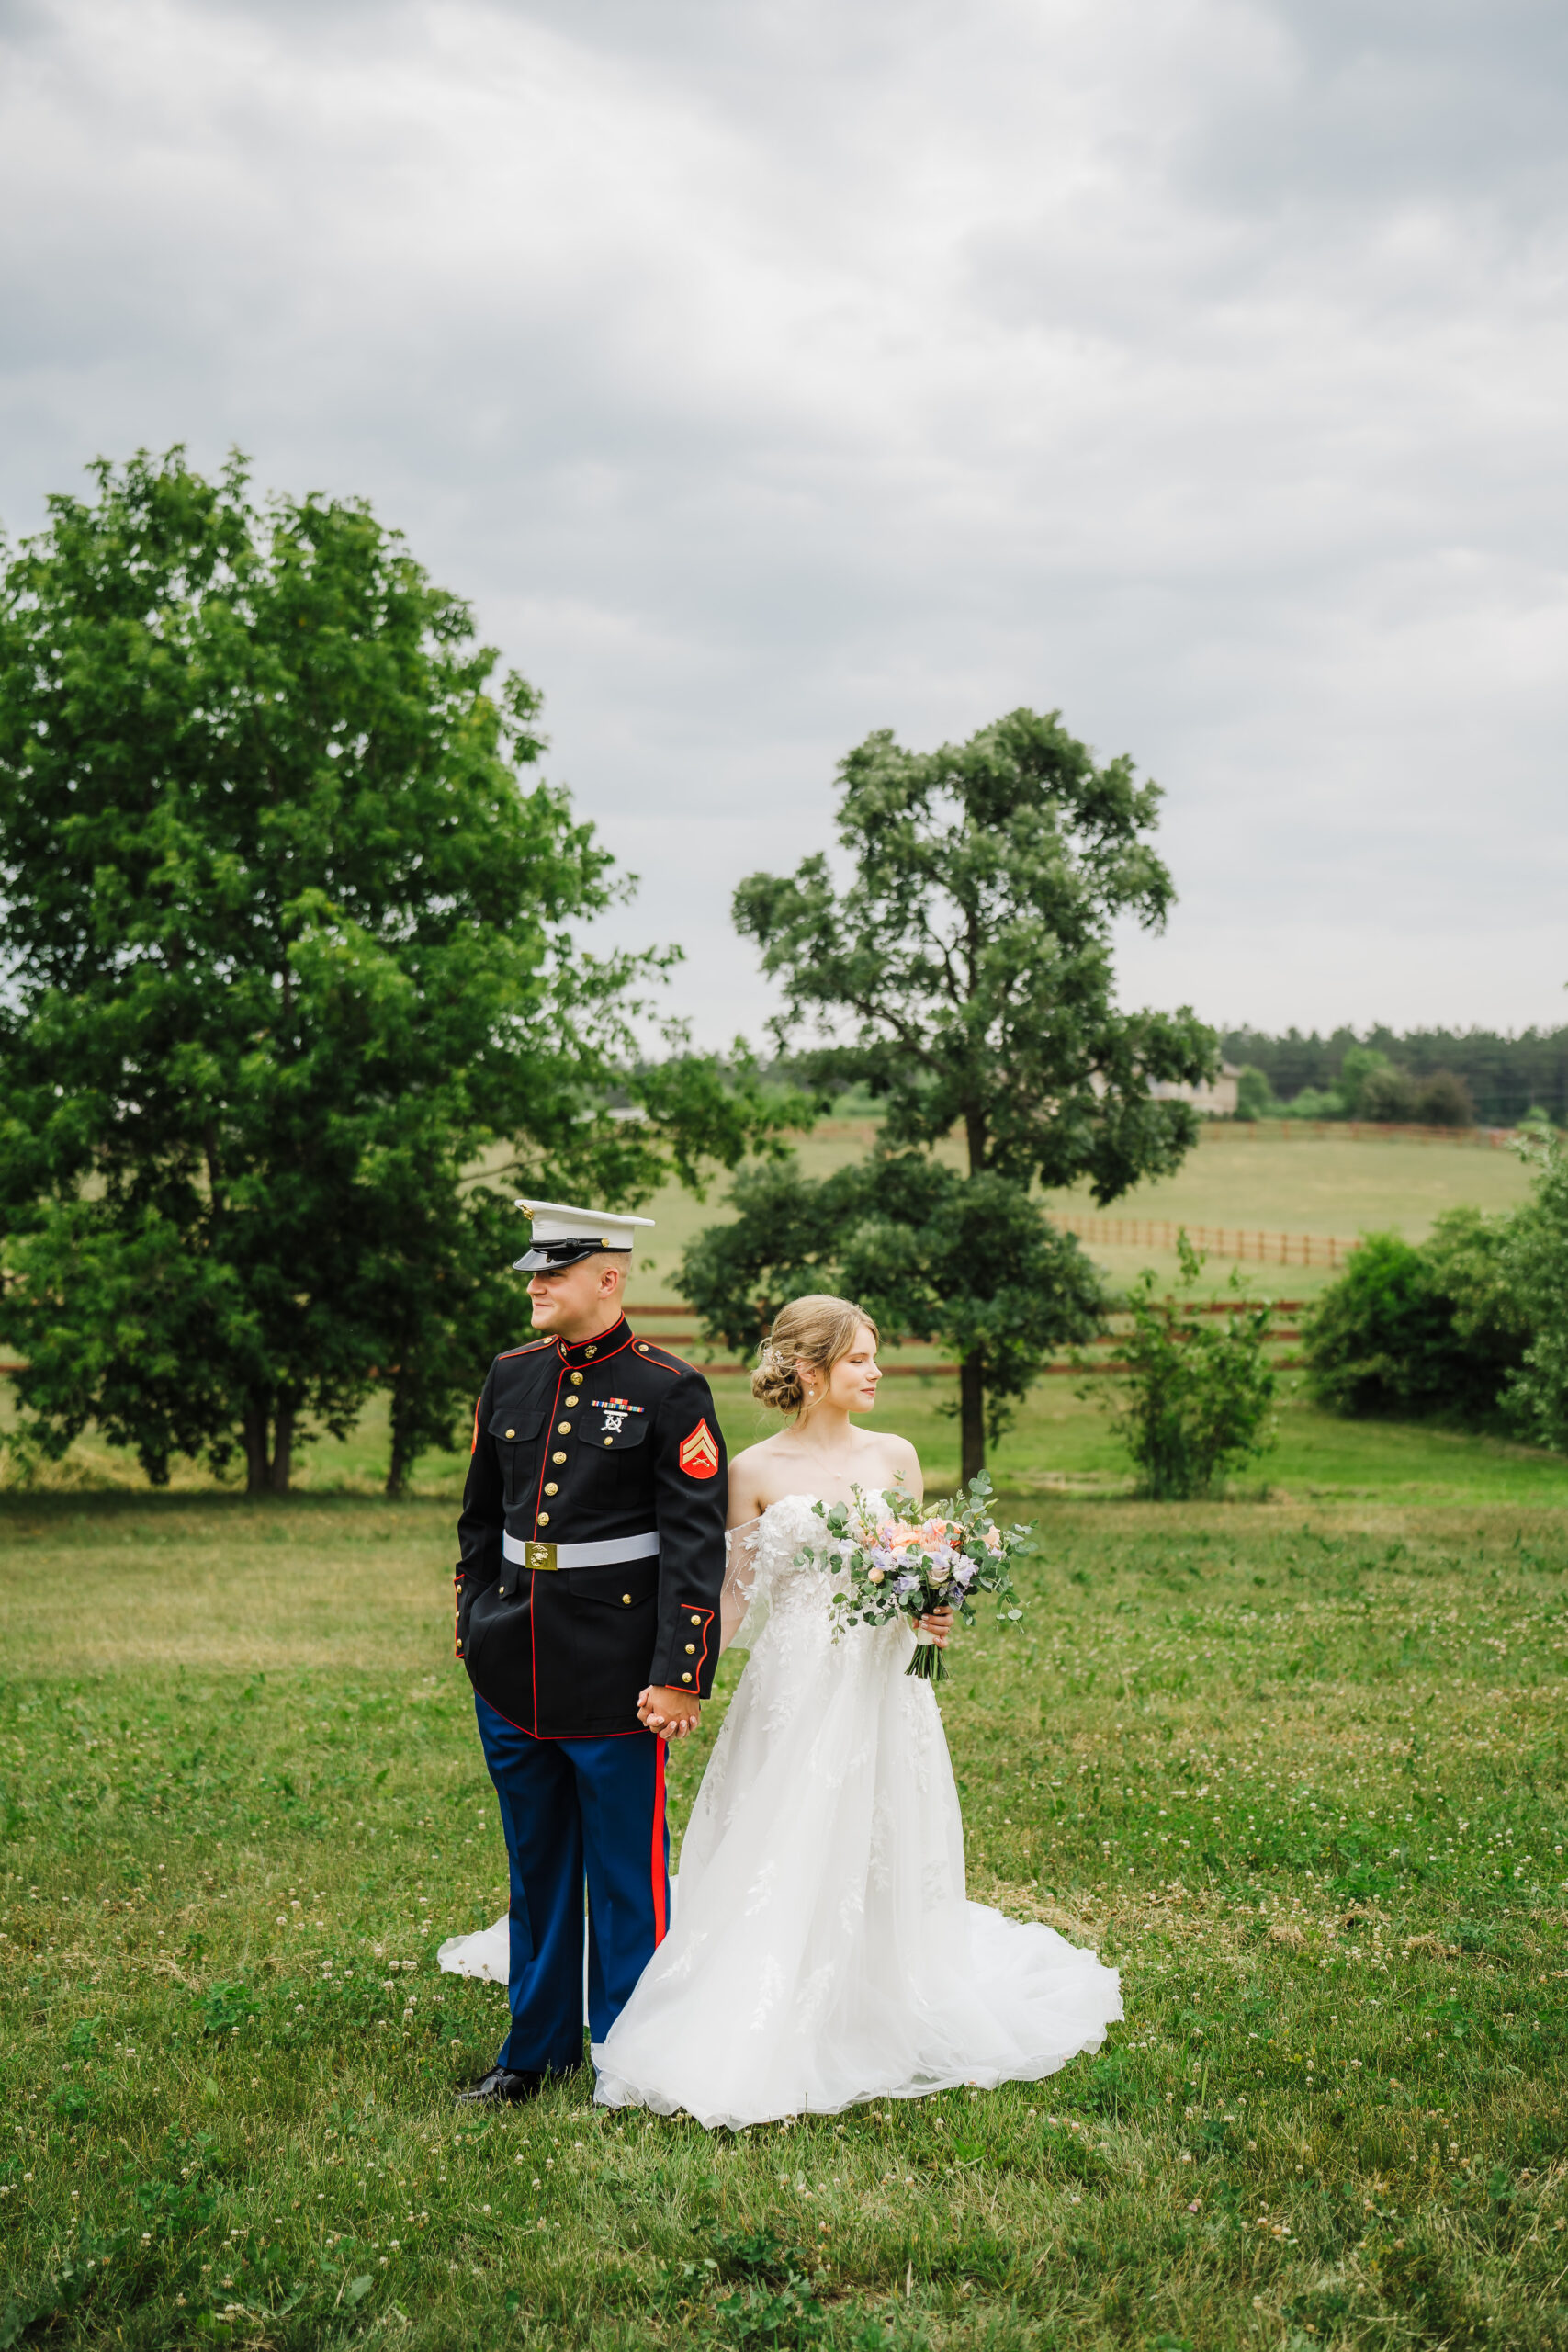 A military groom and his new bride pose in a green field with her burnt orange florals. Couple poses Military wedding Bride and groom photos Bridal portraits #weddinginspiration #weddingplanning #diywedding #wisconsinweddingphotographer #armywedding